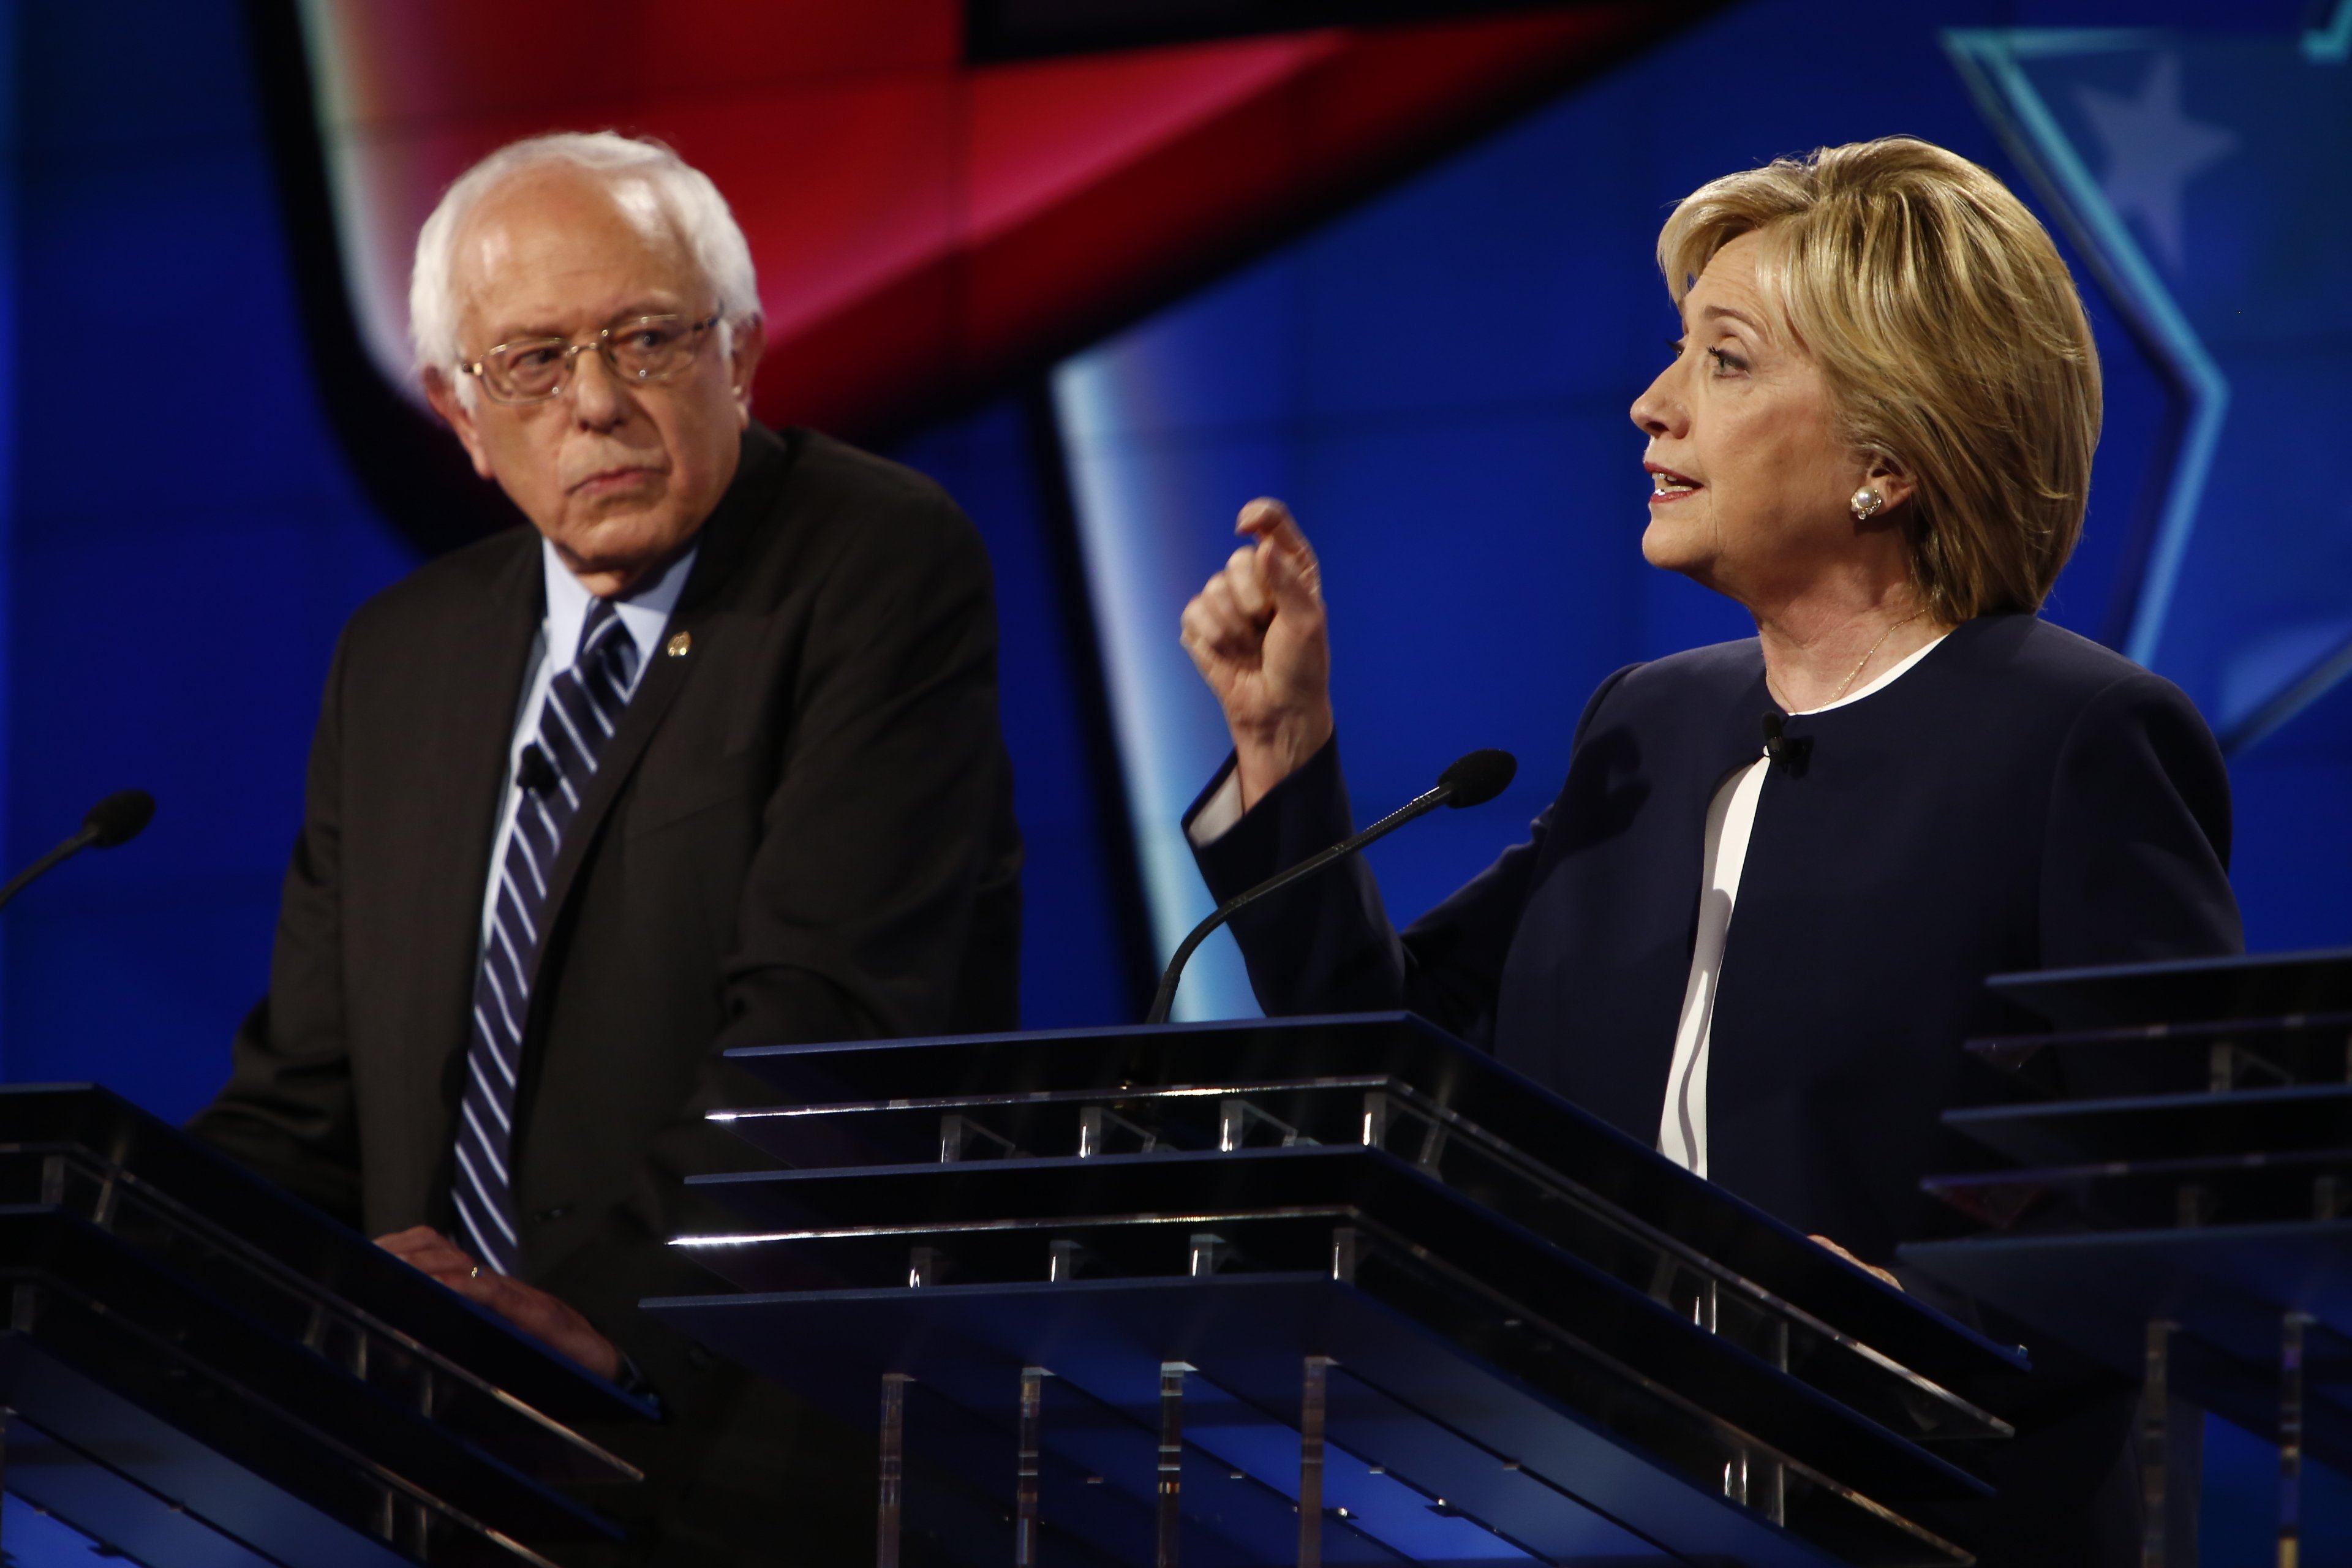 Bernie Sanders and Hillary Clinton at the CNN Democratic Debate at the Wynn Hotel in Las Vegas, Tuesday, October 13, 2015.